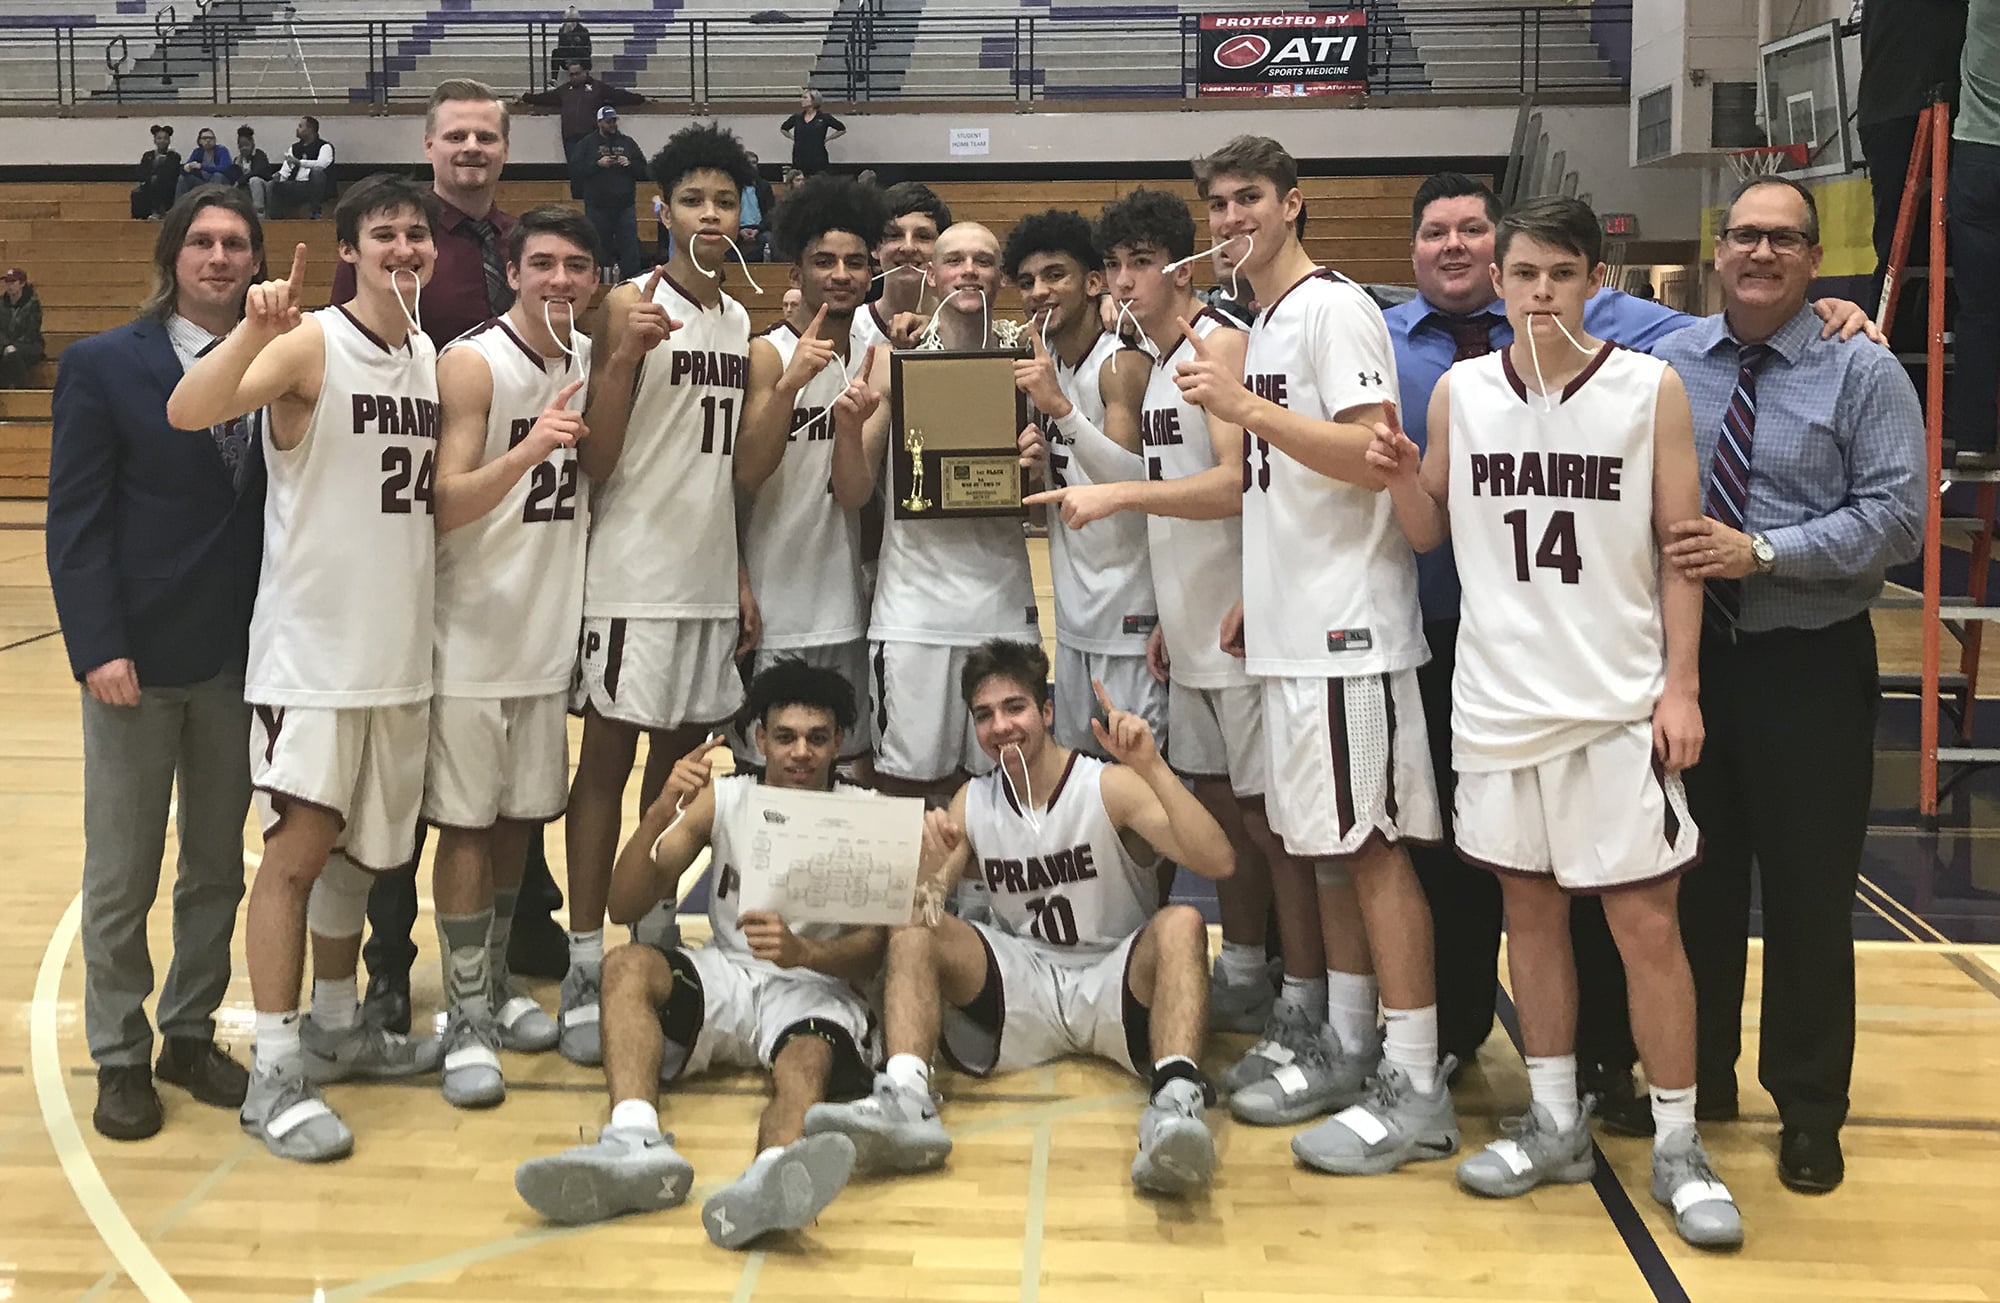 The Prairie boys basketball team celebrates its 3A bi-district tournament championship after beating Kelso 66-62 on Saturday, Feb. 16, 2019, at Puyallup High School.